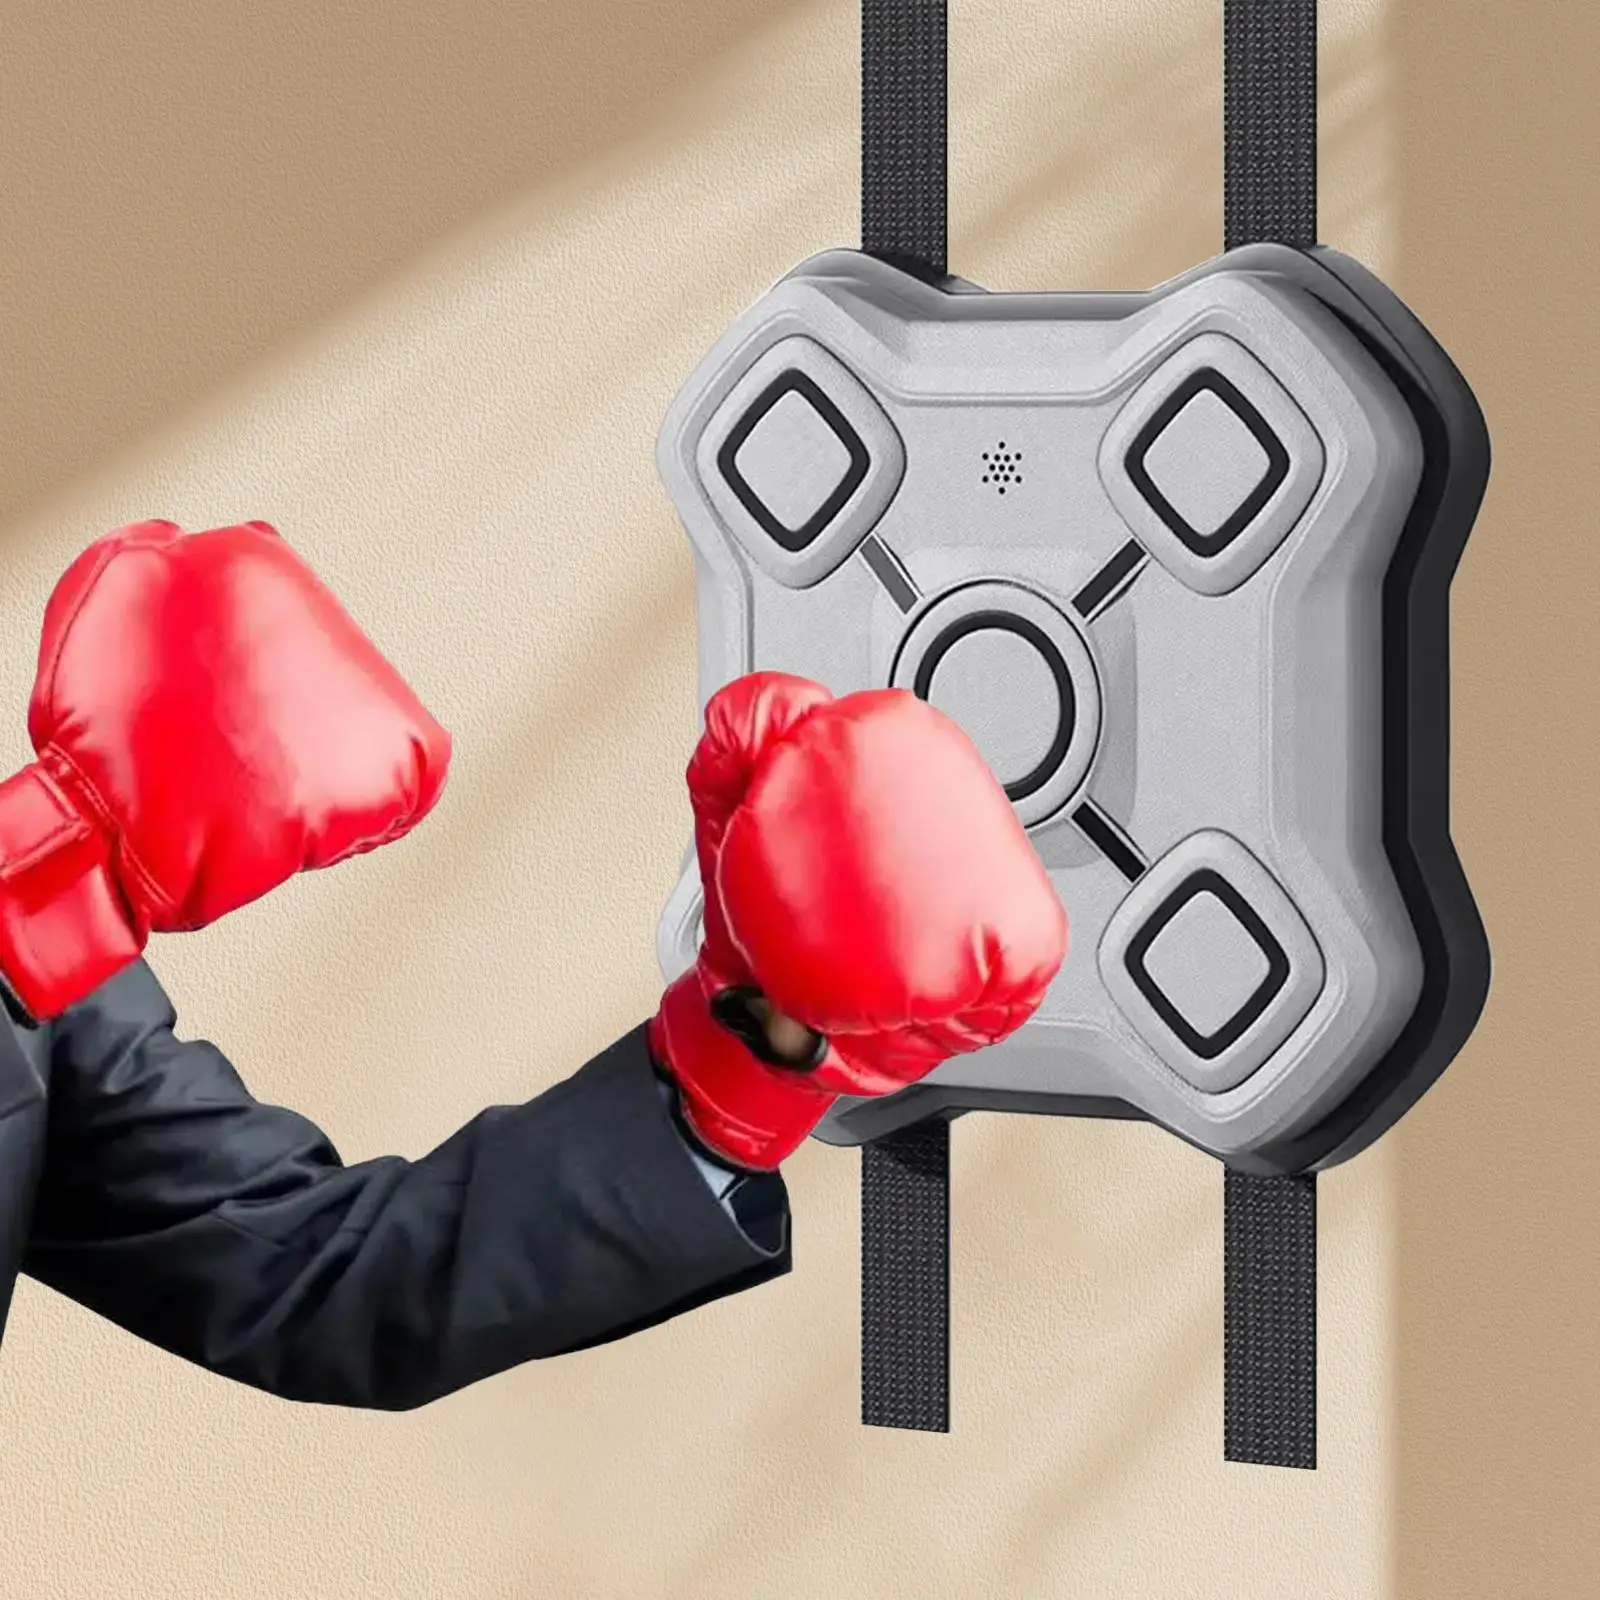 Music Boxing Machine Target Boxing Trainer USB Rechargeable Sandbag Competitions Kids Adults Relaxing Punching Pad Electronic